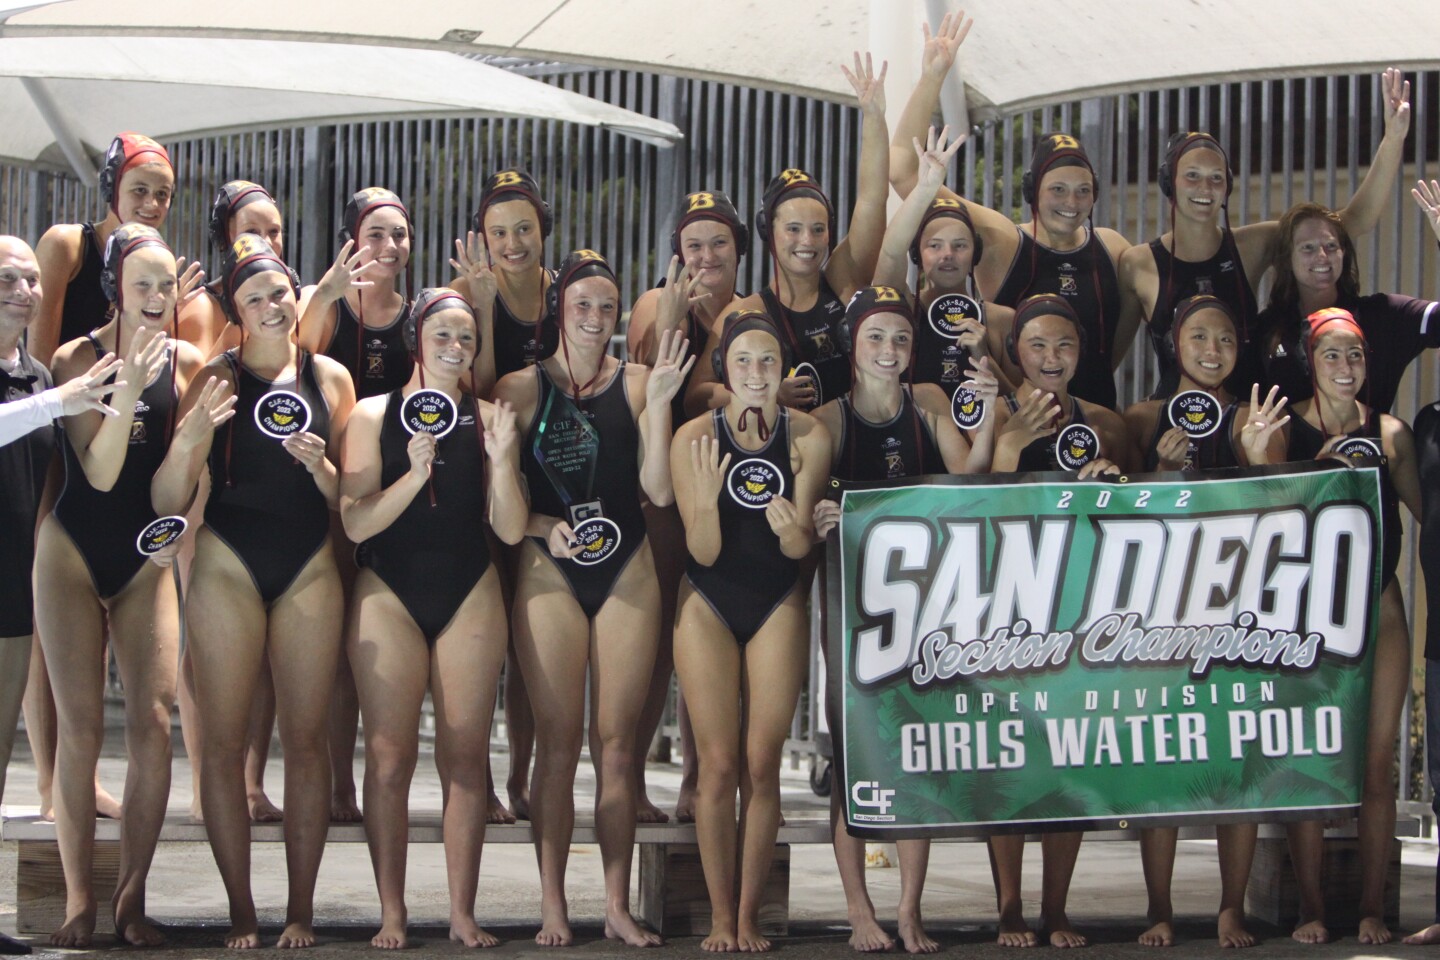 The Bishop's School girls water polo team is the CIF San Diego Section Open Division champion for the fourth straight season.